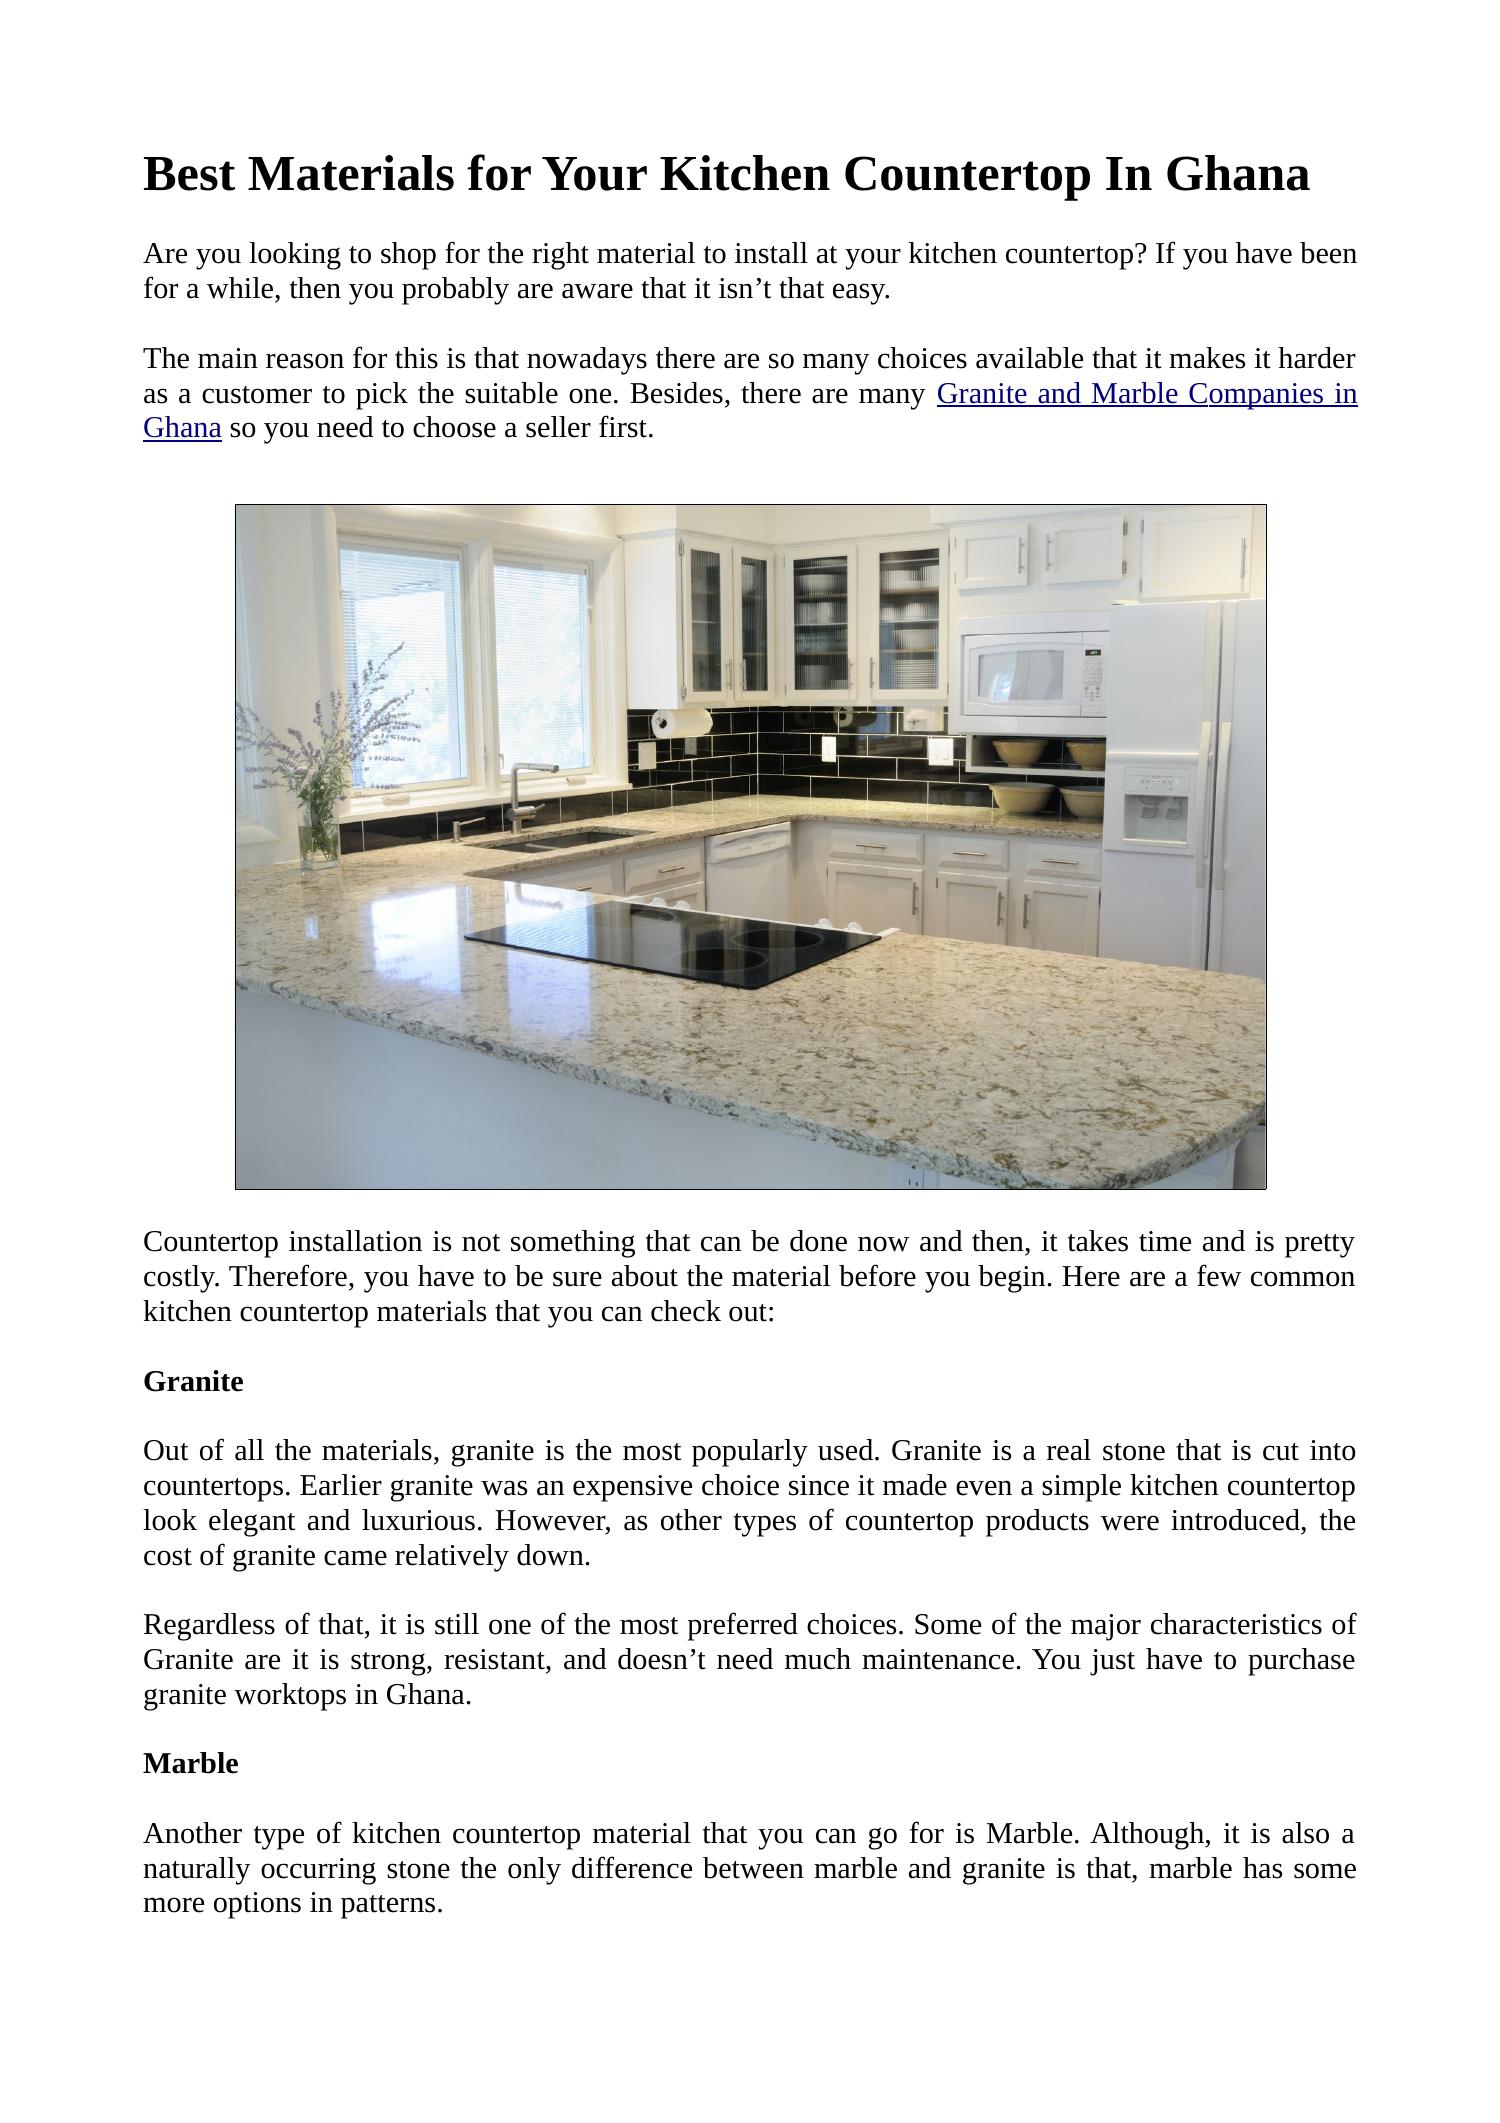 Best Materials For Your Kitchen Countertop In Ghana Pdf Docdroid